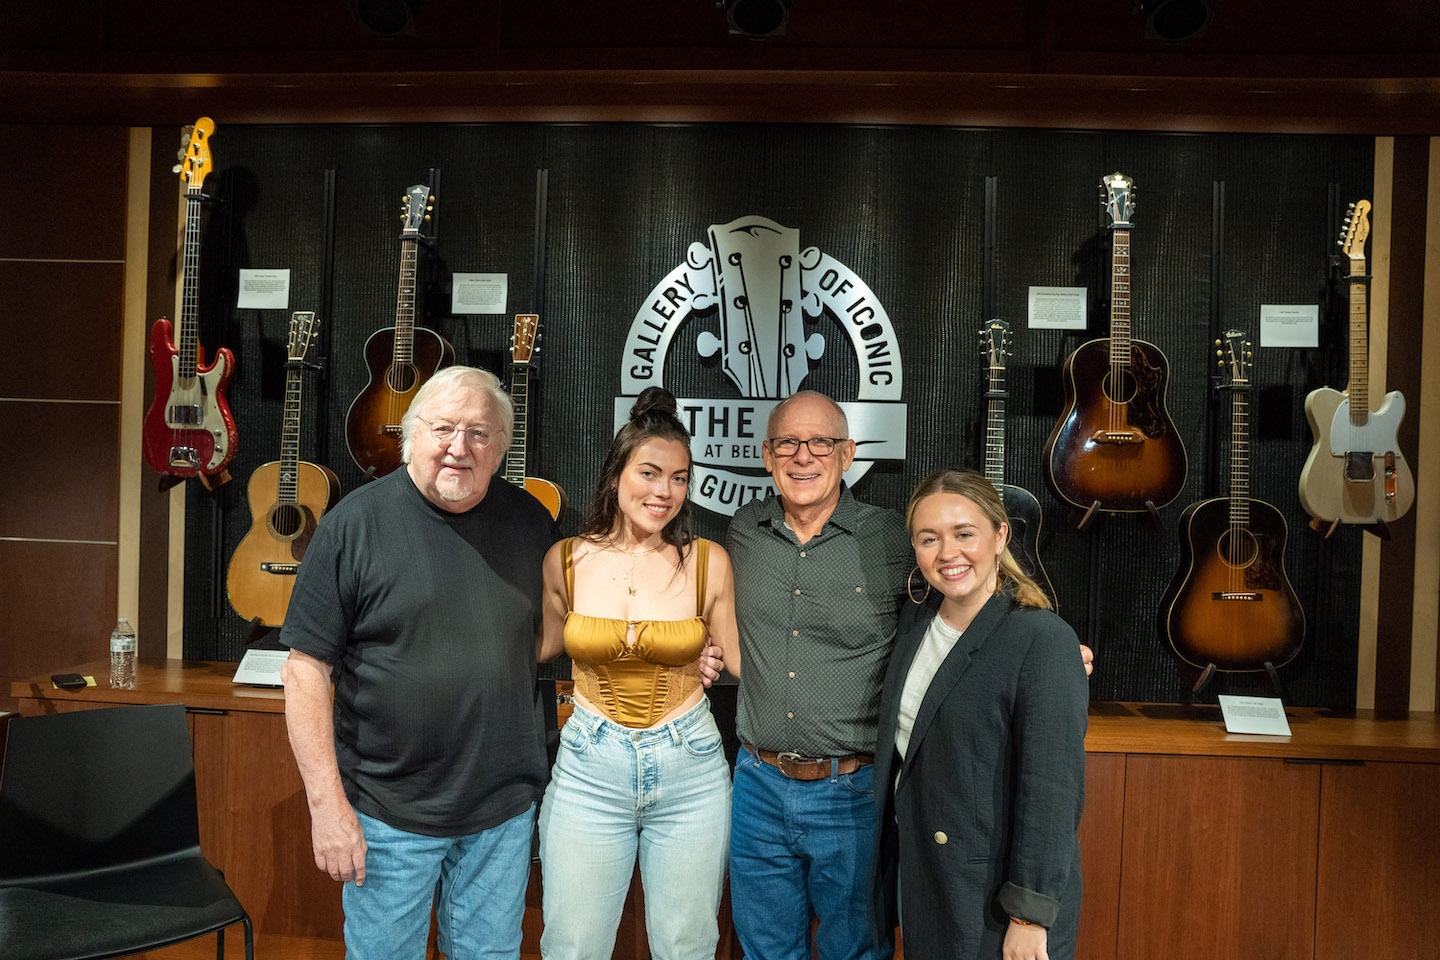 Emily Falvey films class with Pat Alger Emily Weisband Allen Shamblin  Filmed in the GIG (Gallery of Iconic Guitars ) at Belmont University in Nashville, Tennessee, July 18, 2023. Photo by Sam Simpkins